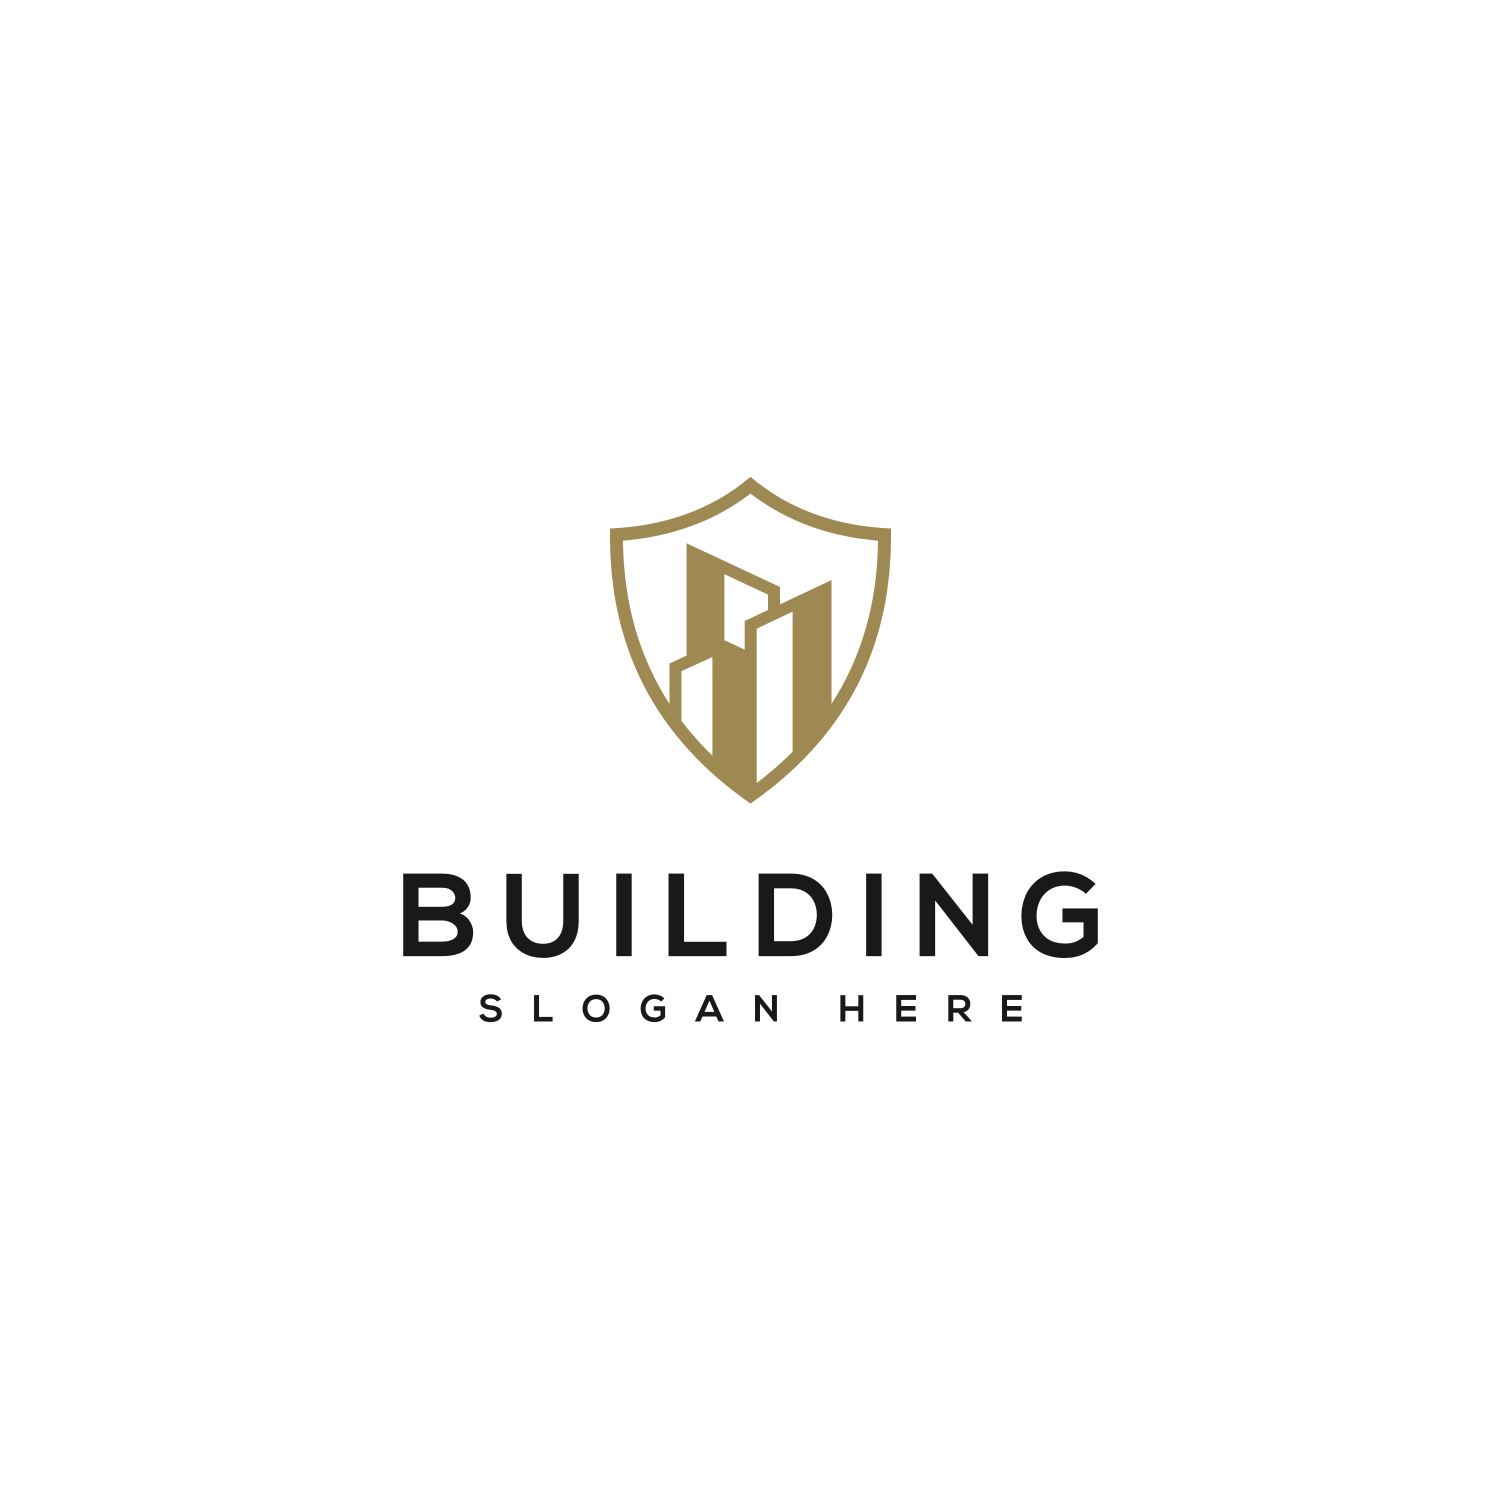 Building Logo with Line Art Style